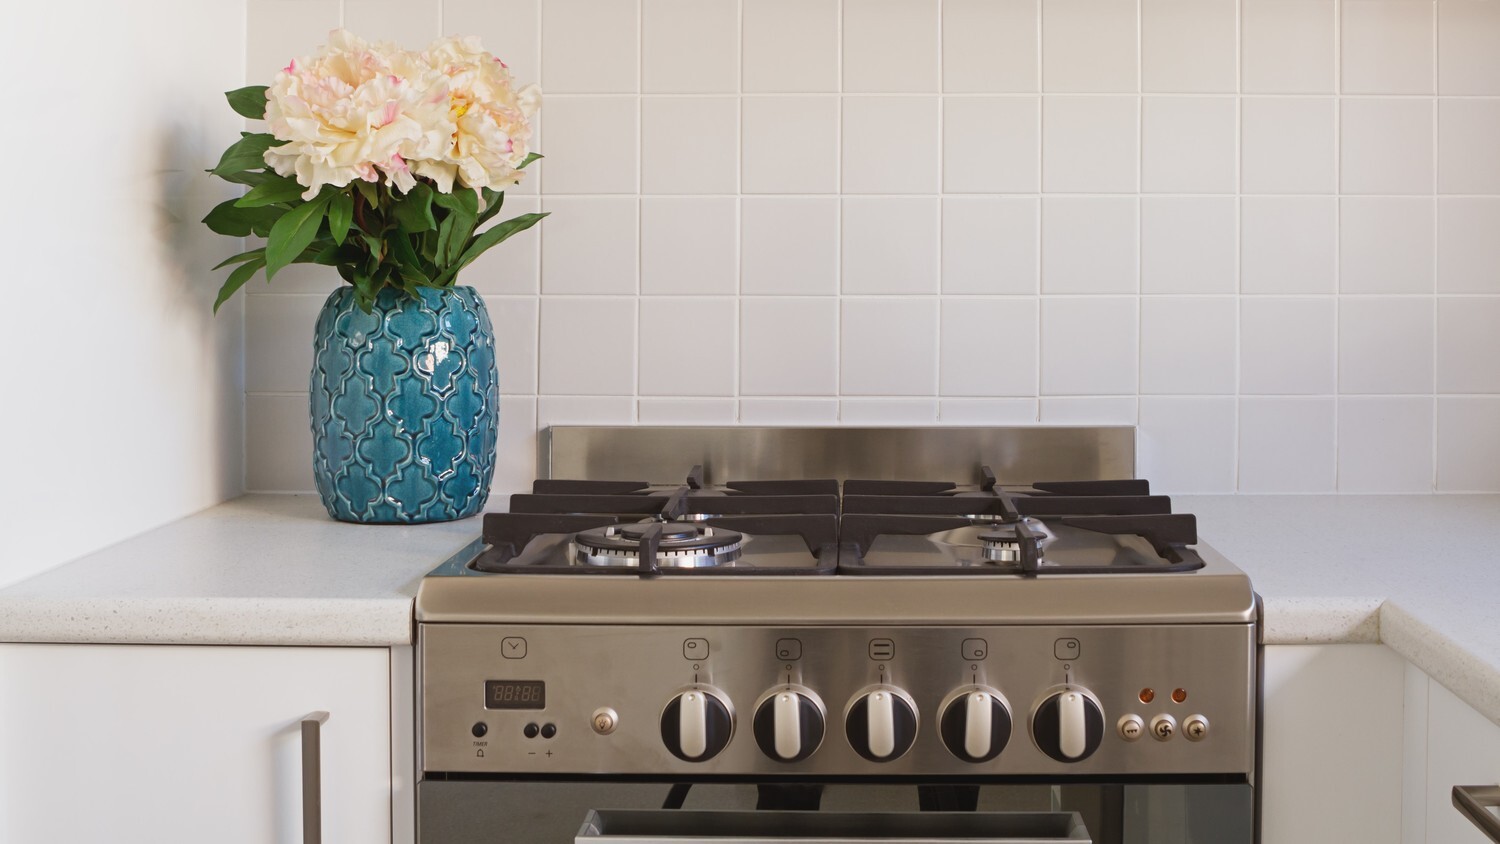 A professional stove installation with a sleek stainless steel stove and range hood in a modern kitchen.